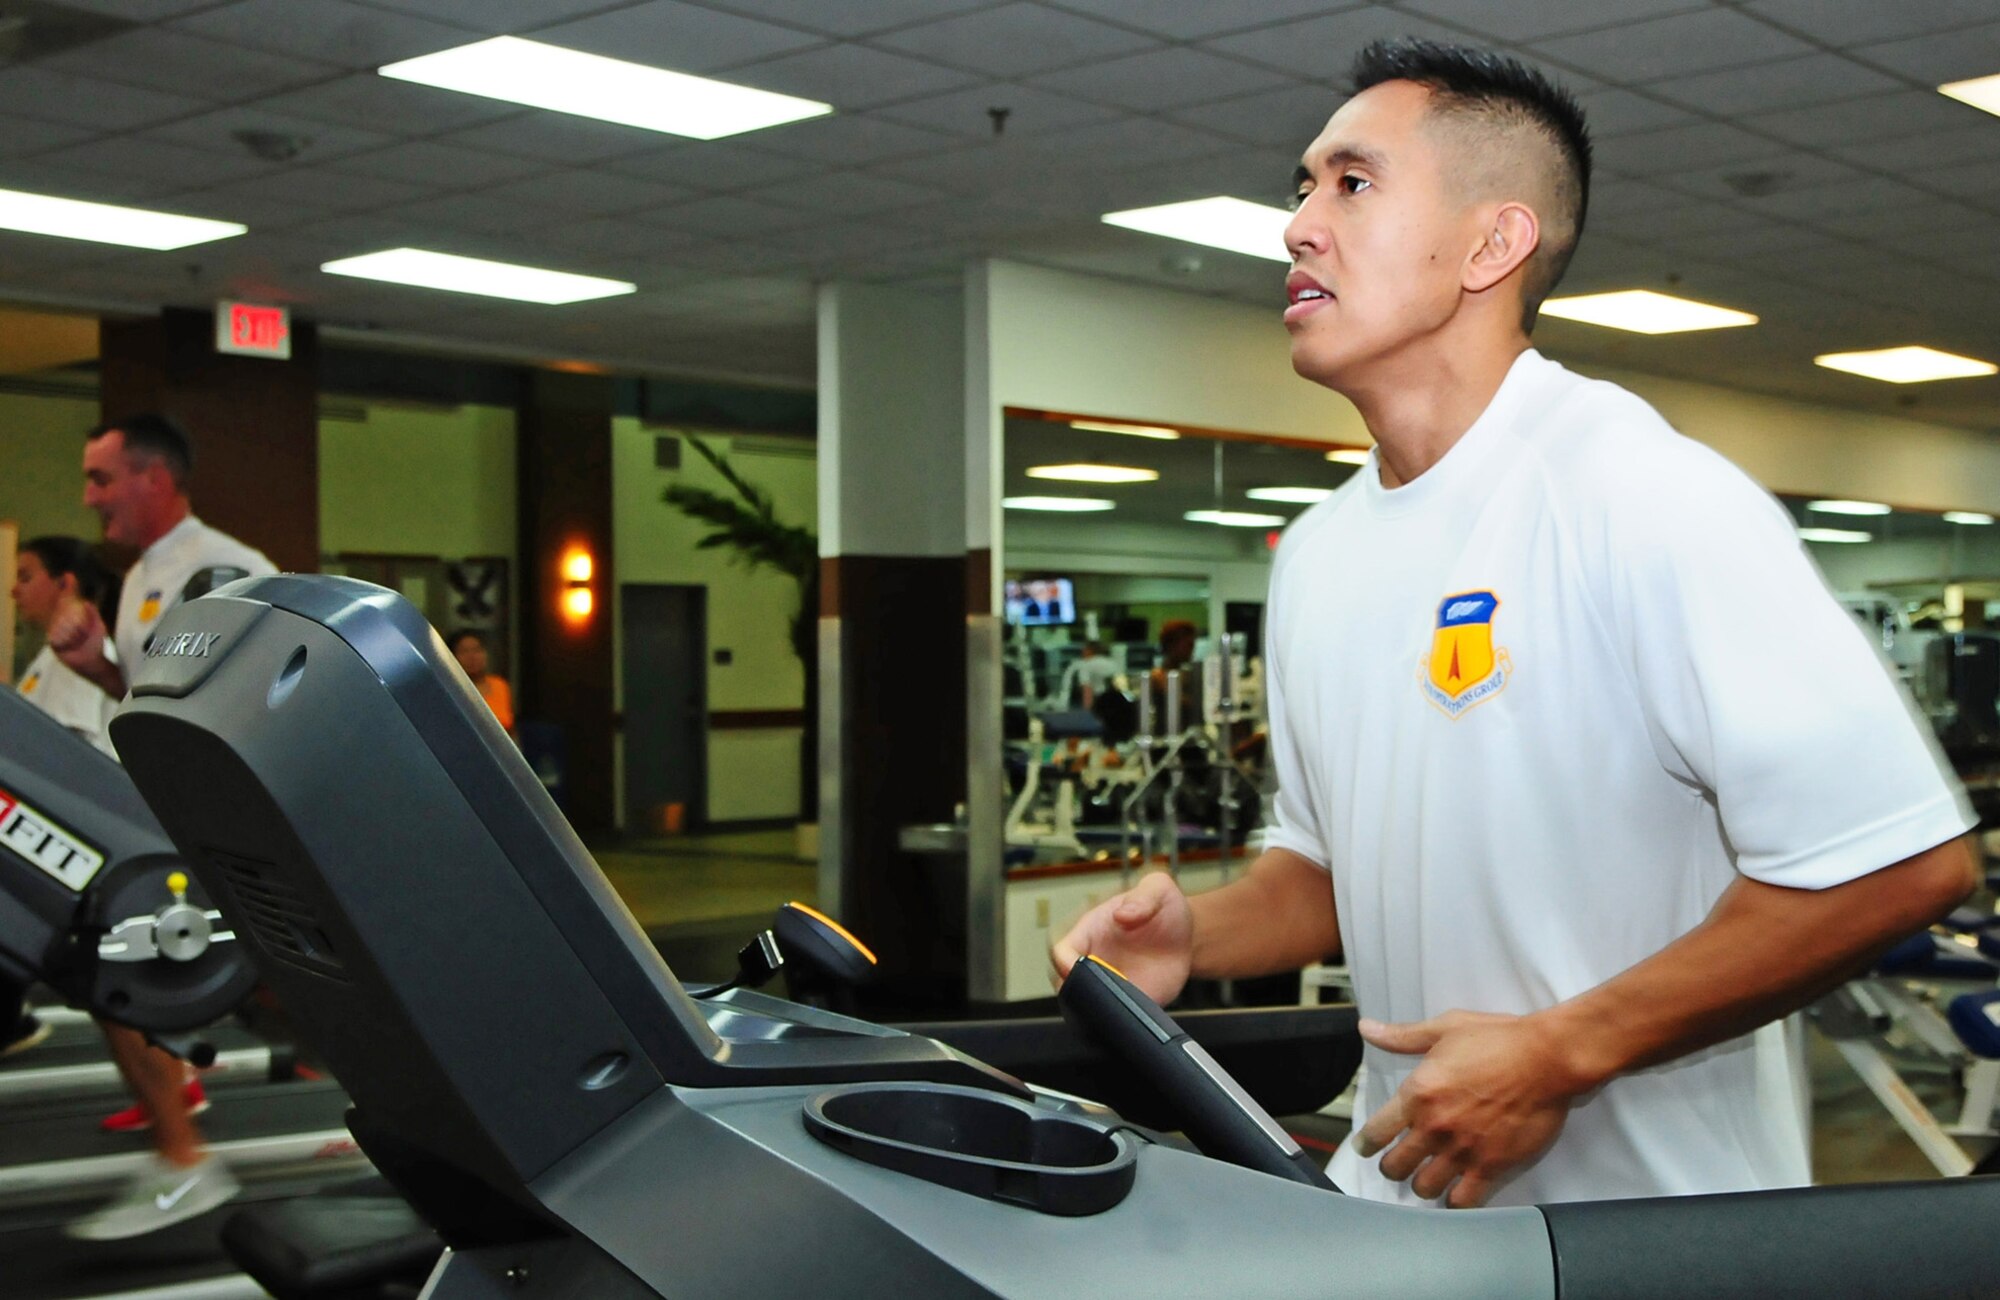 ANDERSEN AIR FORCE BASE, Guam – Tech. Sgt. Kenner Sagorsor, 36th Operations Group resource adviser, runs on the treadmill in order to accomplish goals in the running portion of the 360 challenge, Aug. 3. With physical fitness being a huge part of Airmen’s lives, along with the 36th Wing’s goal of getting 90 percent of the Airmen on base at 90 or above on their fitness tests, the 36th OG staff leads the way in getting creative for a healthy cause. (U.S. Air Force photo by Airman 1st Class Marianique Santos/Released)